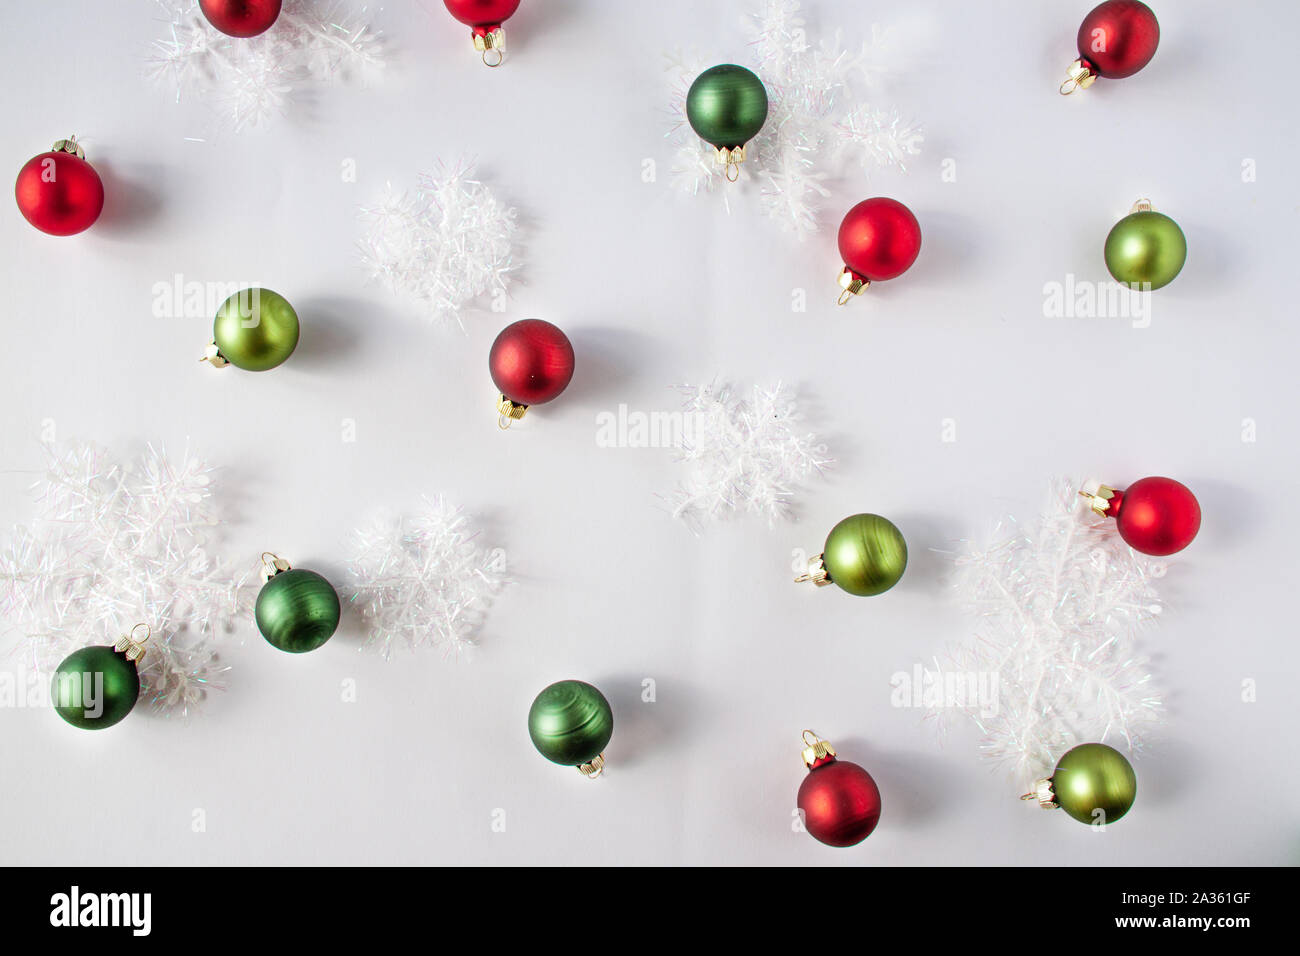 Decorative snow and christmas balls of red and green colors. Christmas concept flat lay Stock Photo